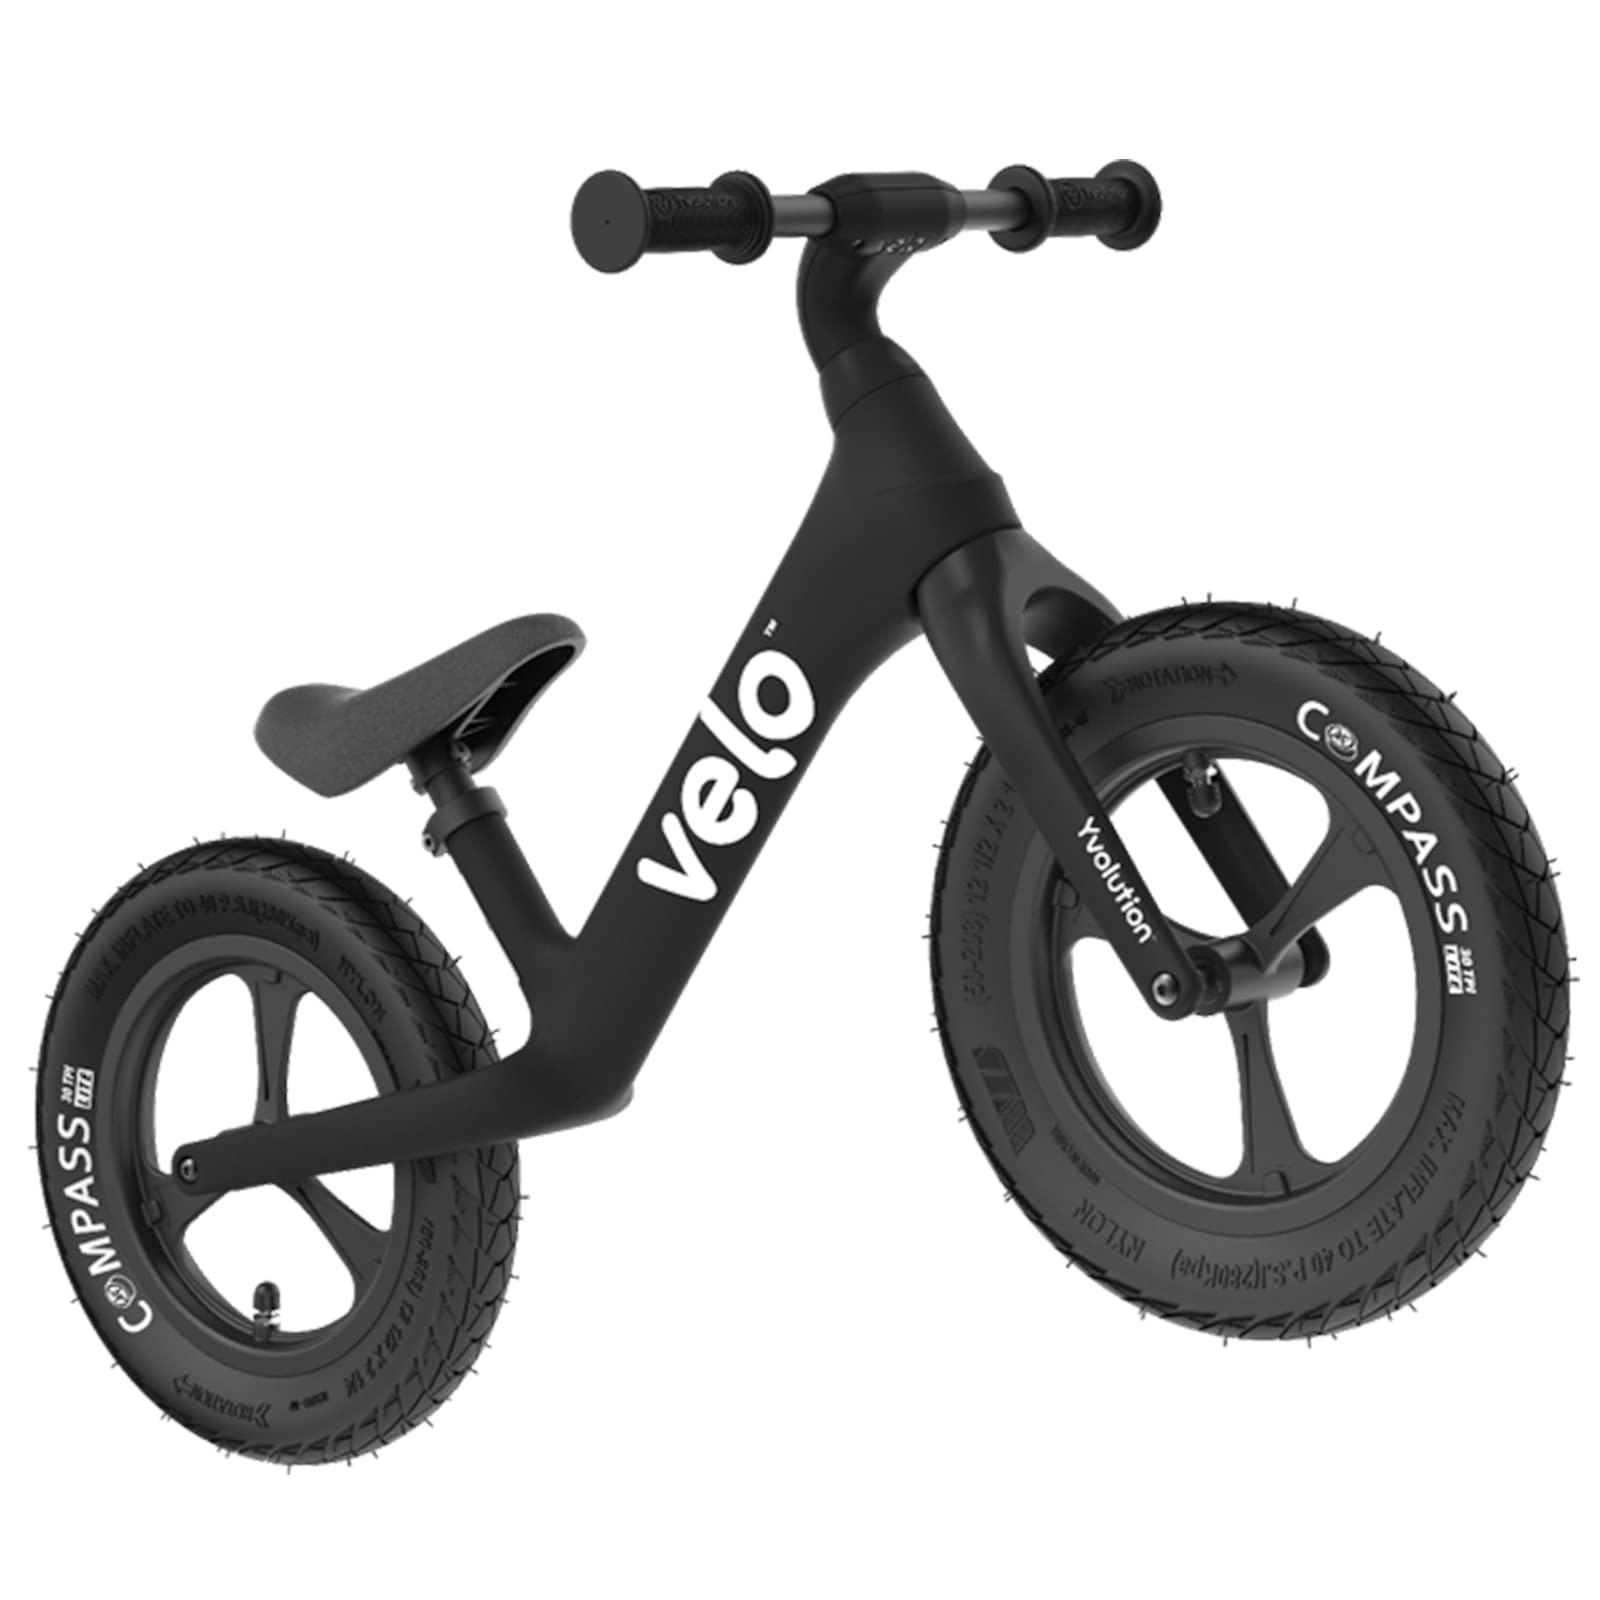 yvolution sport lightweight balance bike, y velo pro learn to bikes no pedal training bicycle for kids age 3, 4, 5 years old 